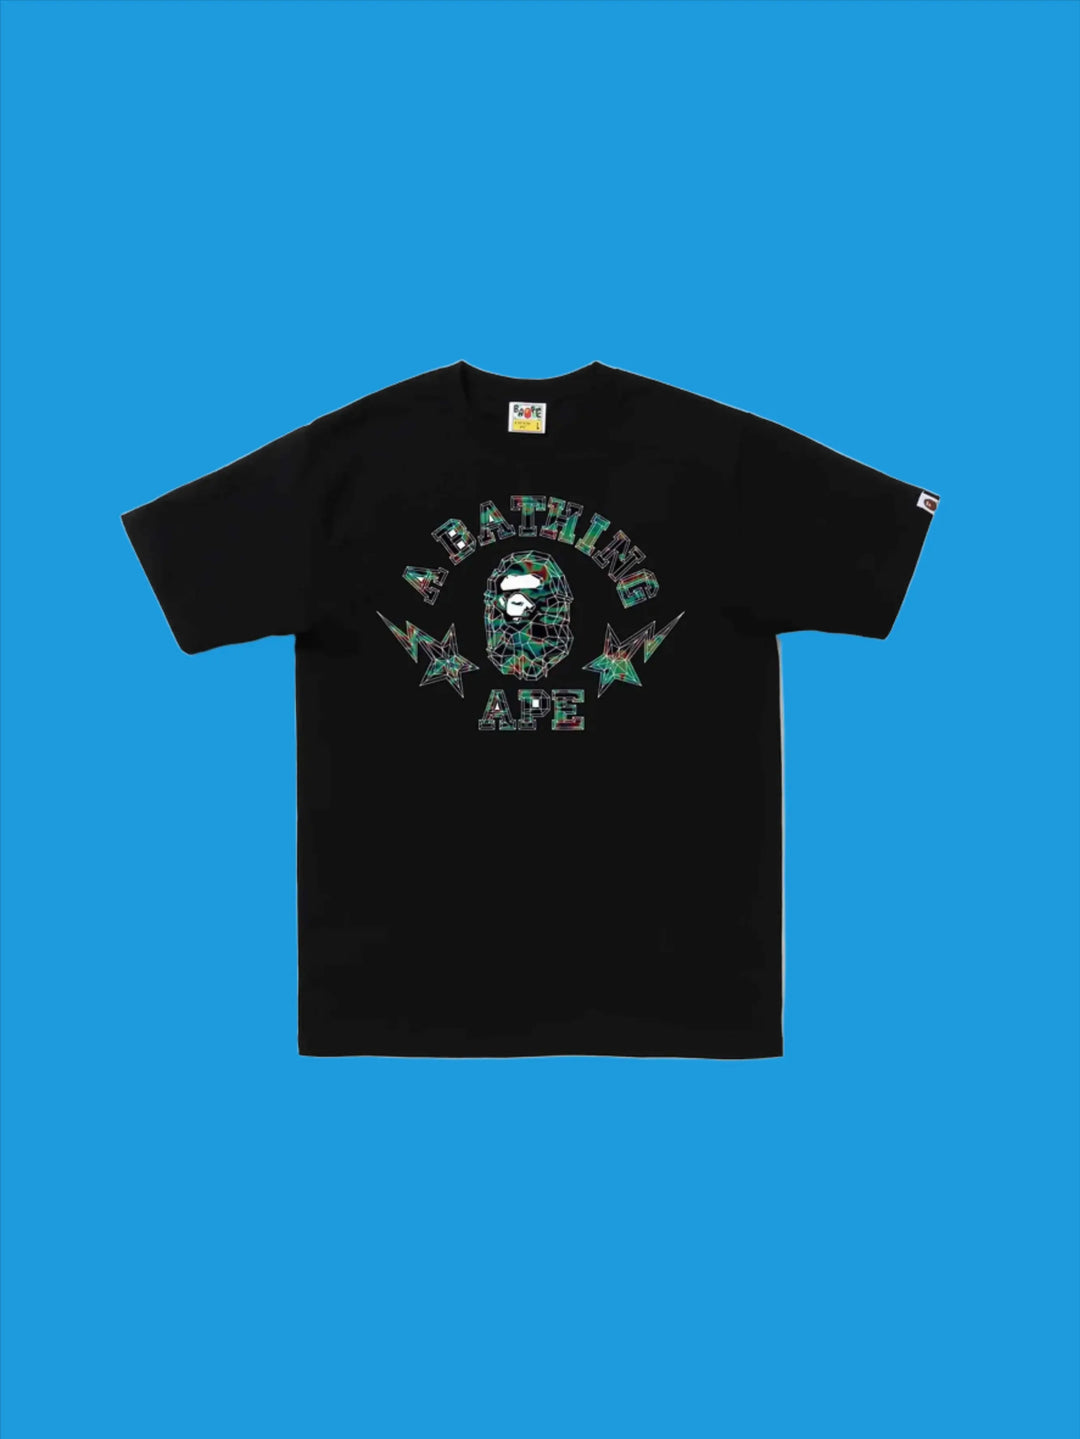 A Bathing Ape Thermography Polygon College Tee in Auckland, New Zealand - Shop name